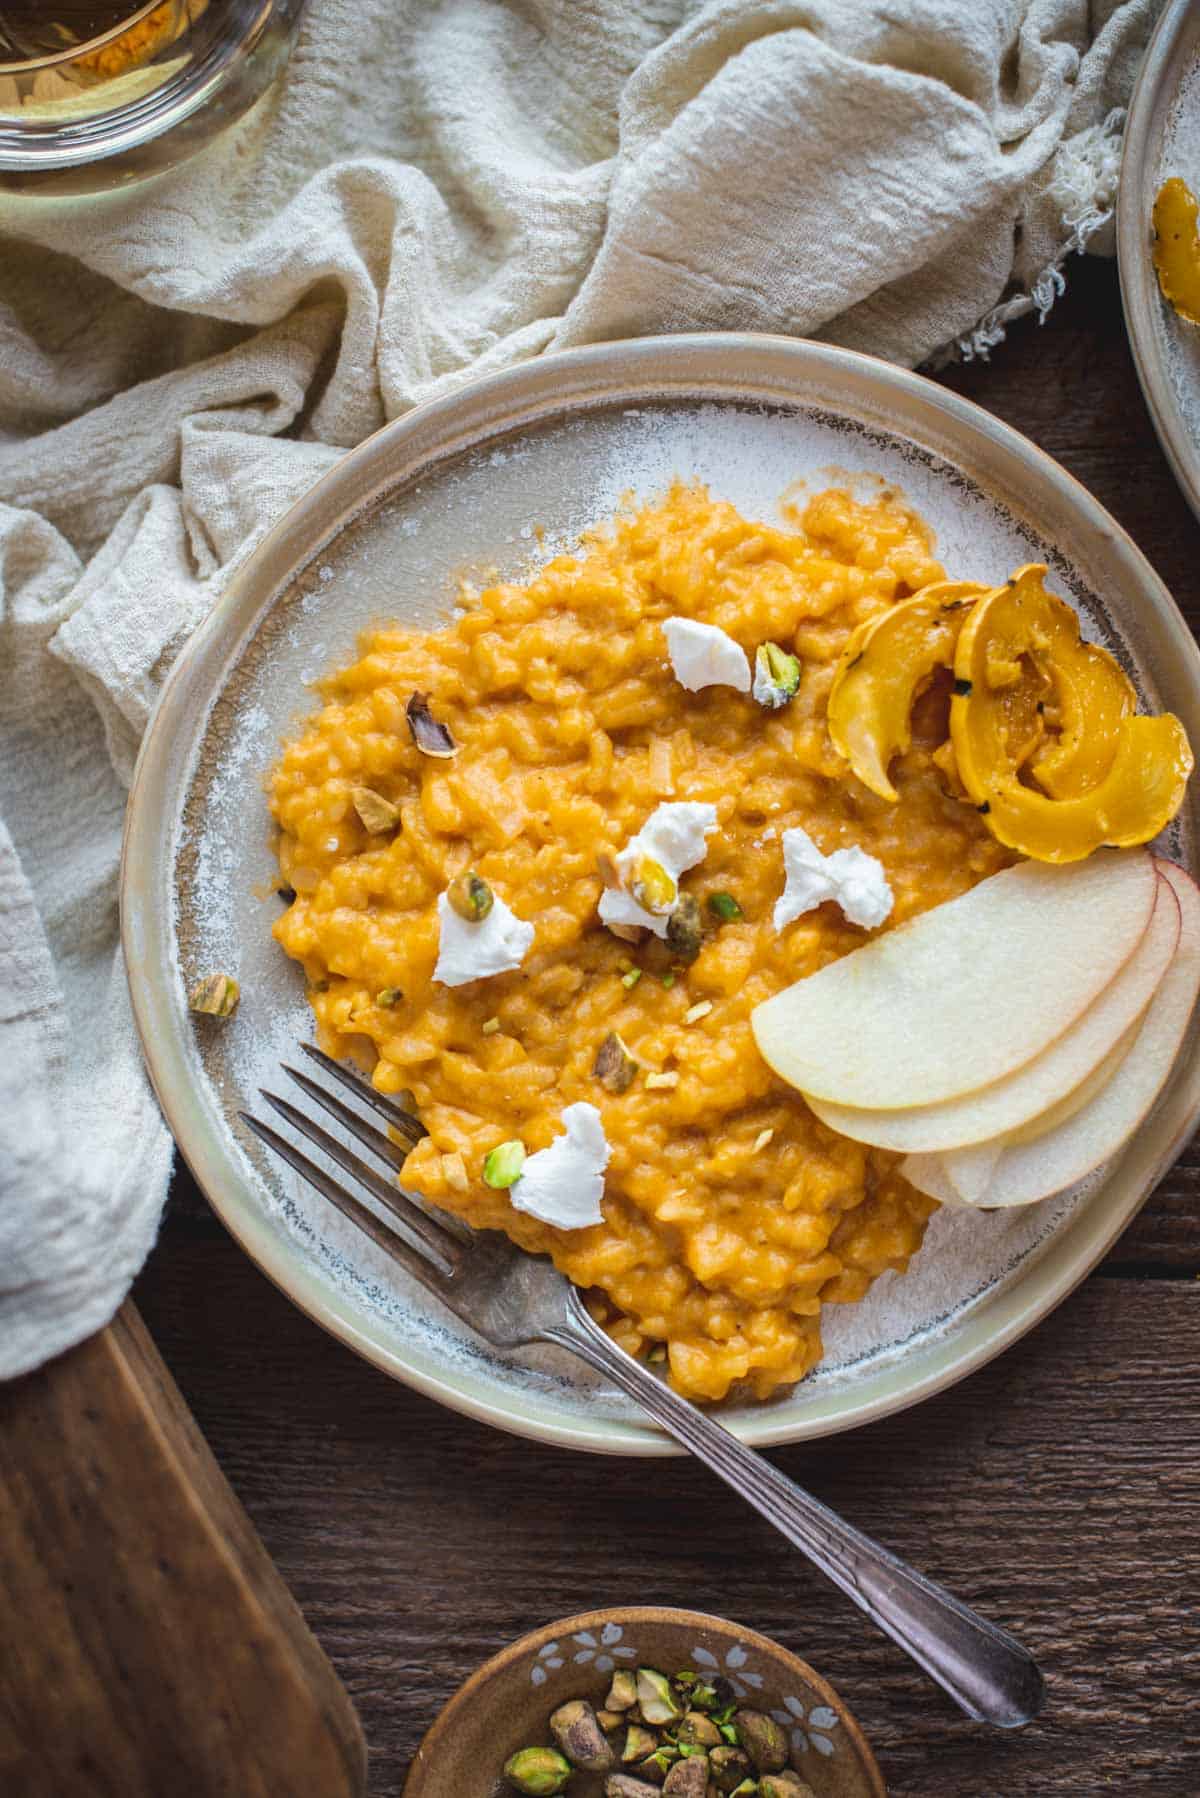 View from above of baked pumpkin risotto on a ceramic plate with a fork balanced on the side. There is chunks of soft goats cheese on top alongside some apple slices and pumpkin pieces.